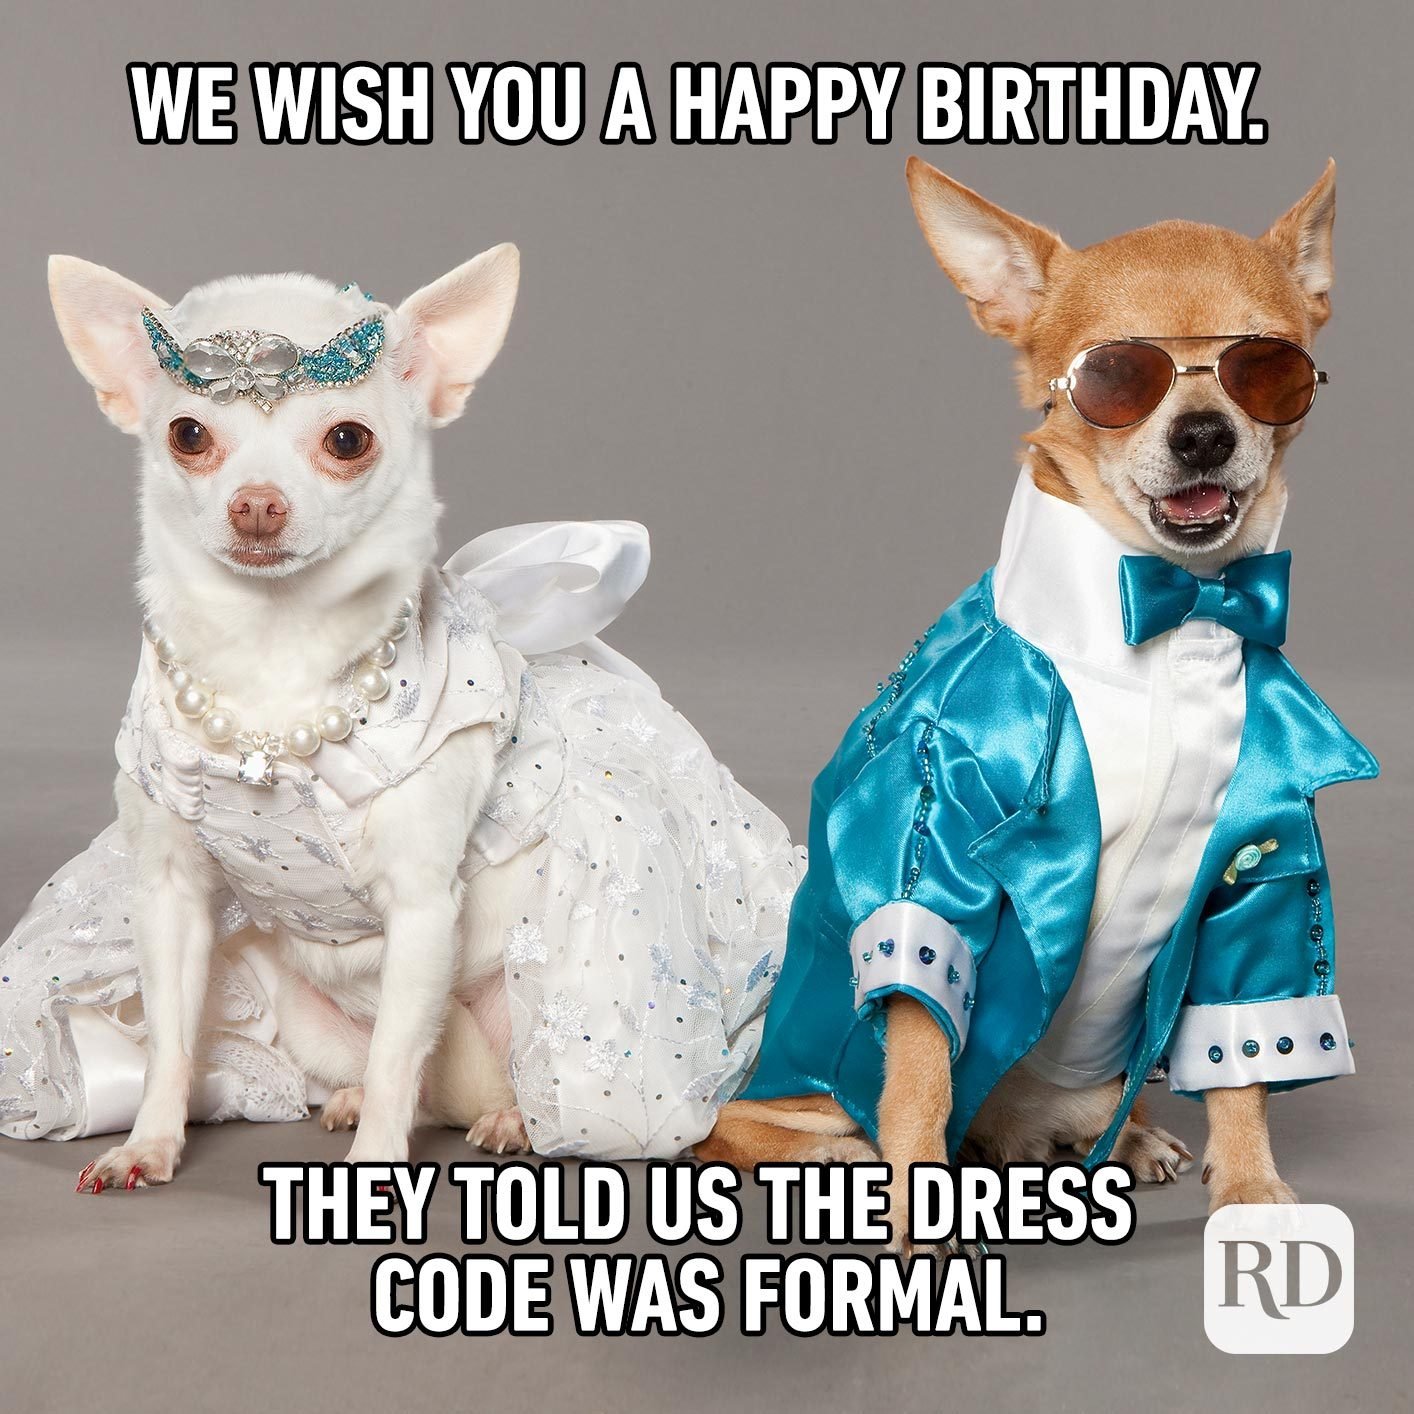 We wish you a Happy Birthday. They told us the dress code was formal.